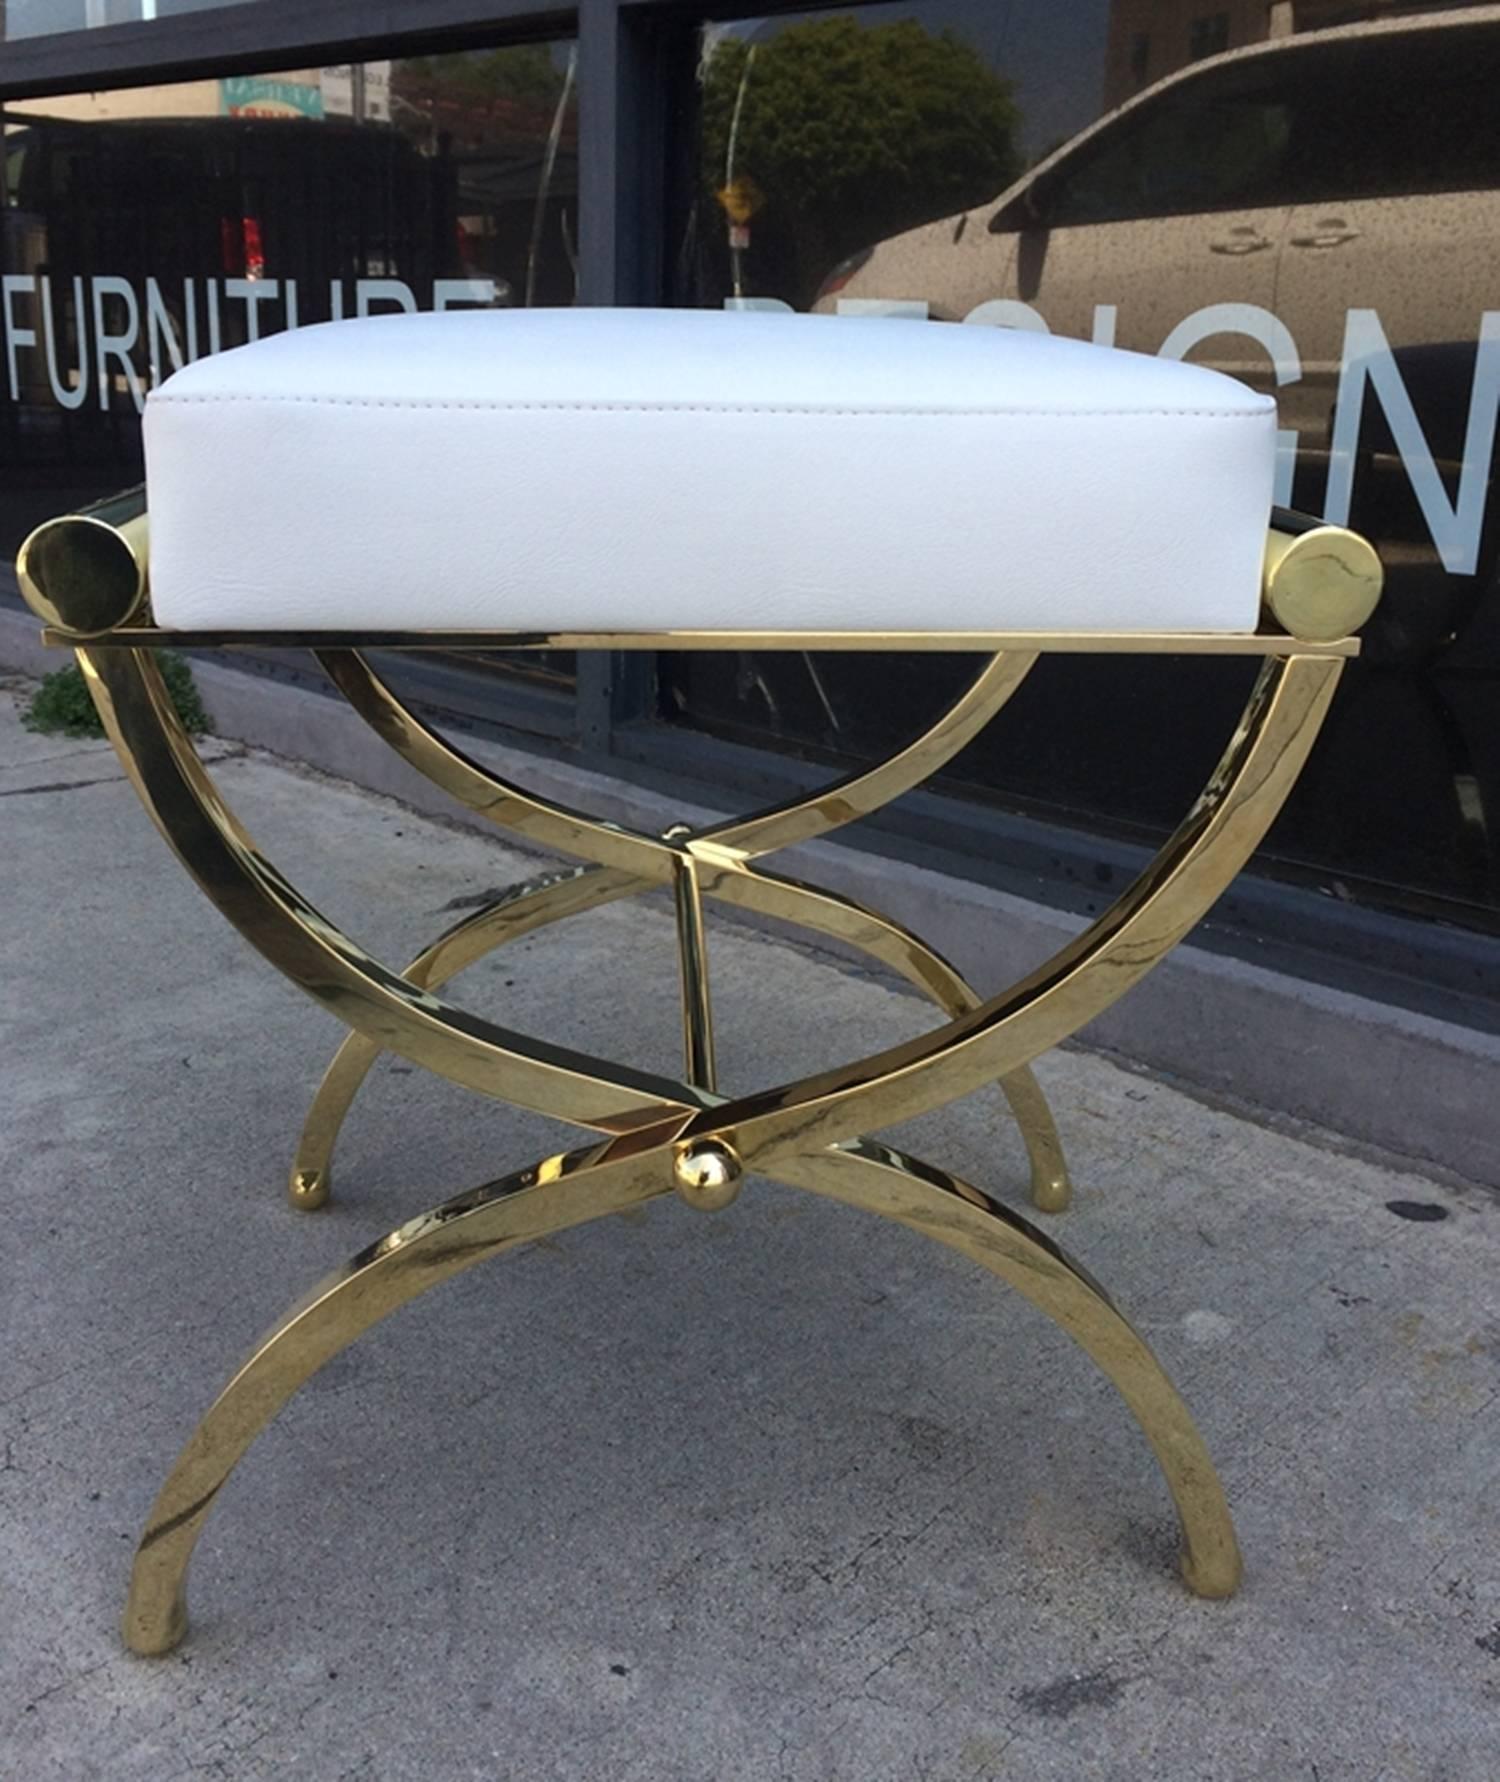 Exceptional Empire style bench designed and manufactured by Charles Hollis Jones.
The bench was designed in the 1960s and is just as influential today.

The playful frames of this bench is made of solid brass with Lucite accents and upholstered in